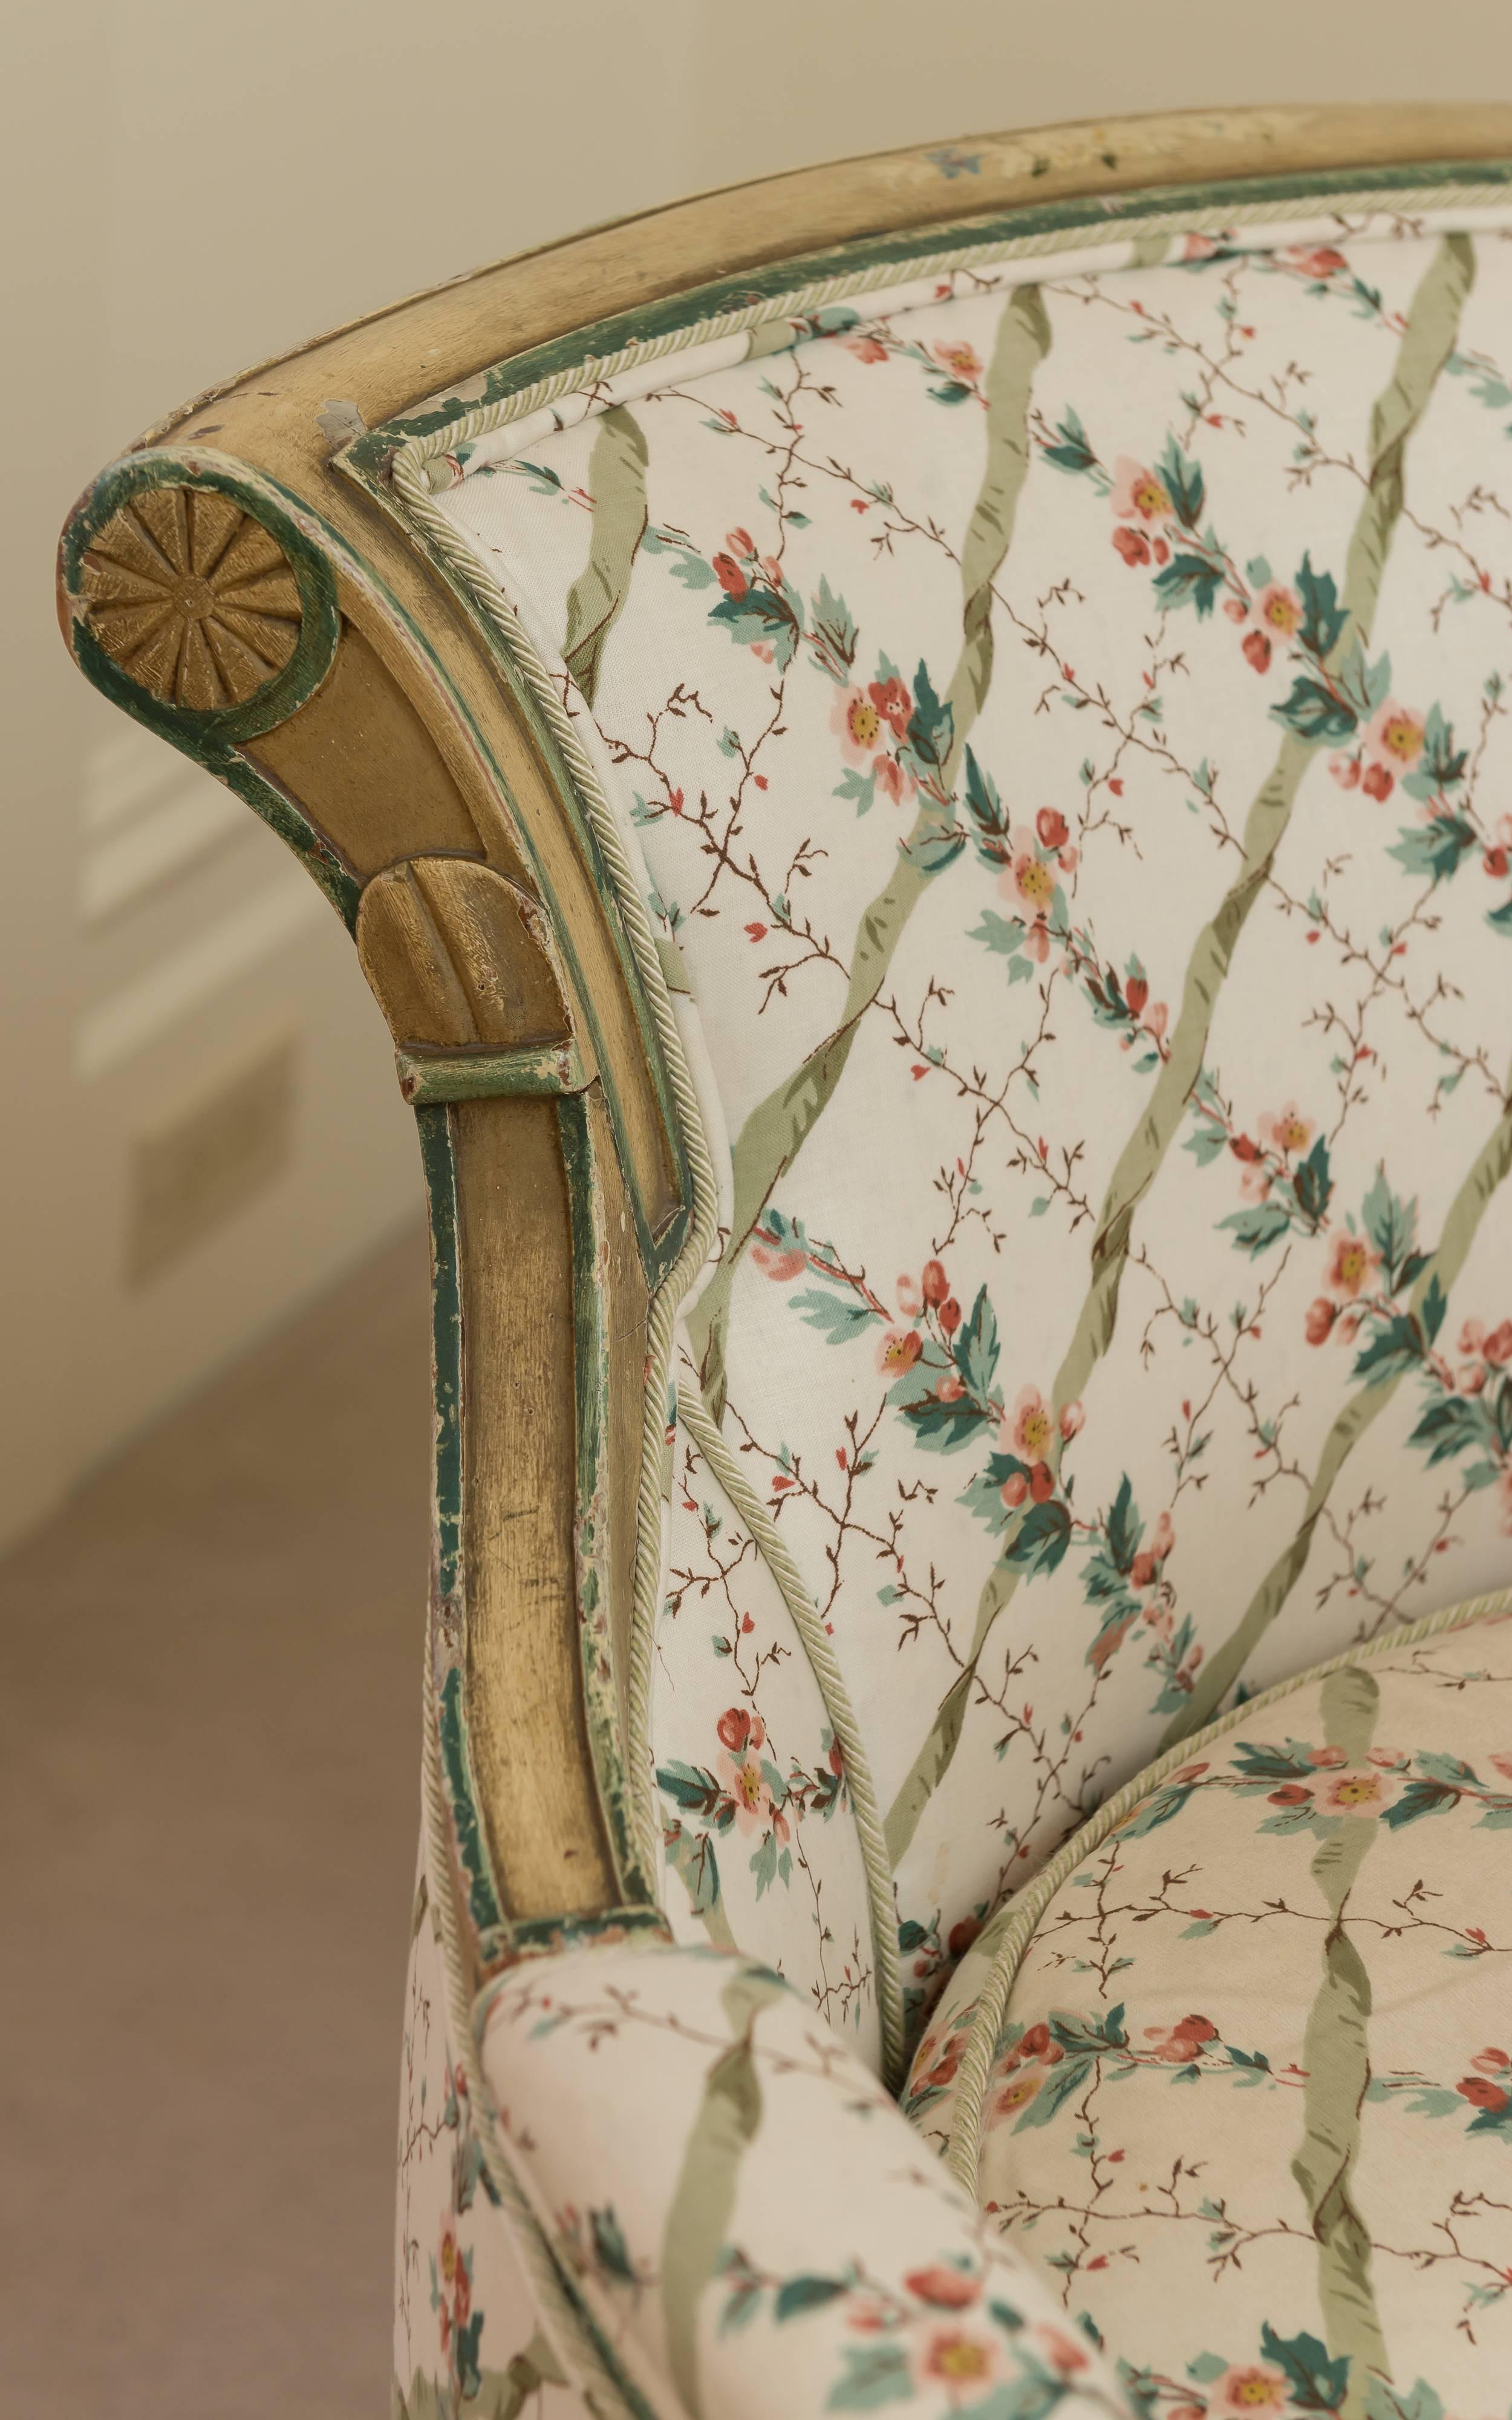 Directoire upholstered ladies' bergère with down cushion and sold scroll back. The chair has upholstered arms resting on balustrade columns and scabbard legs with block with rosette detail. The two tone paint is original. The Lee Jofa fabric is a